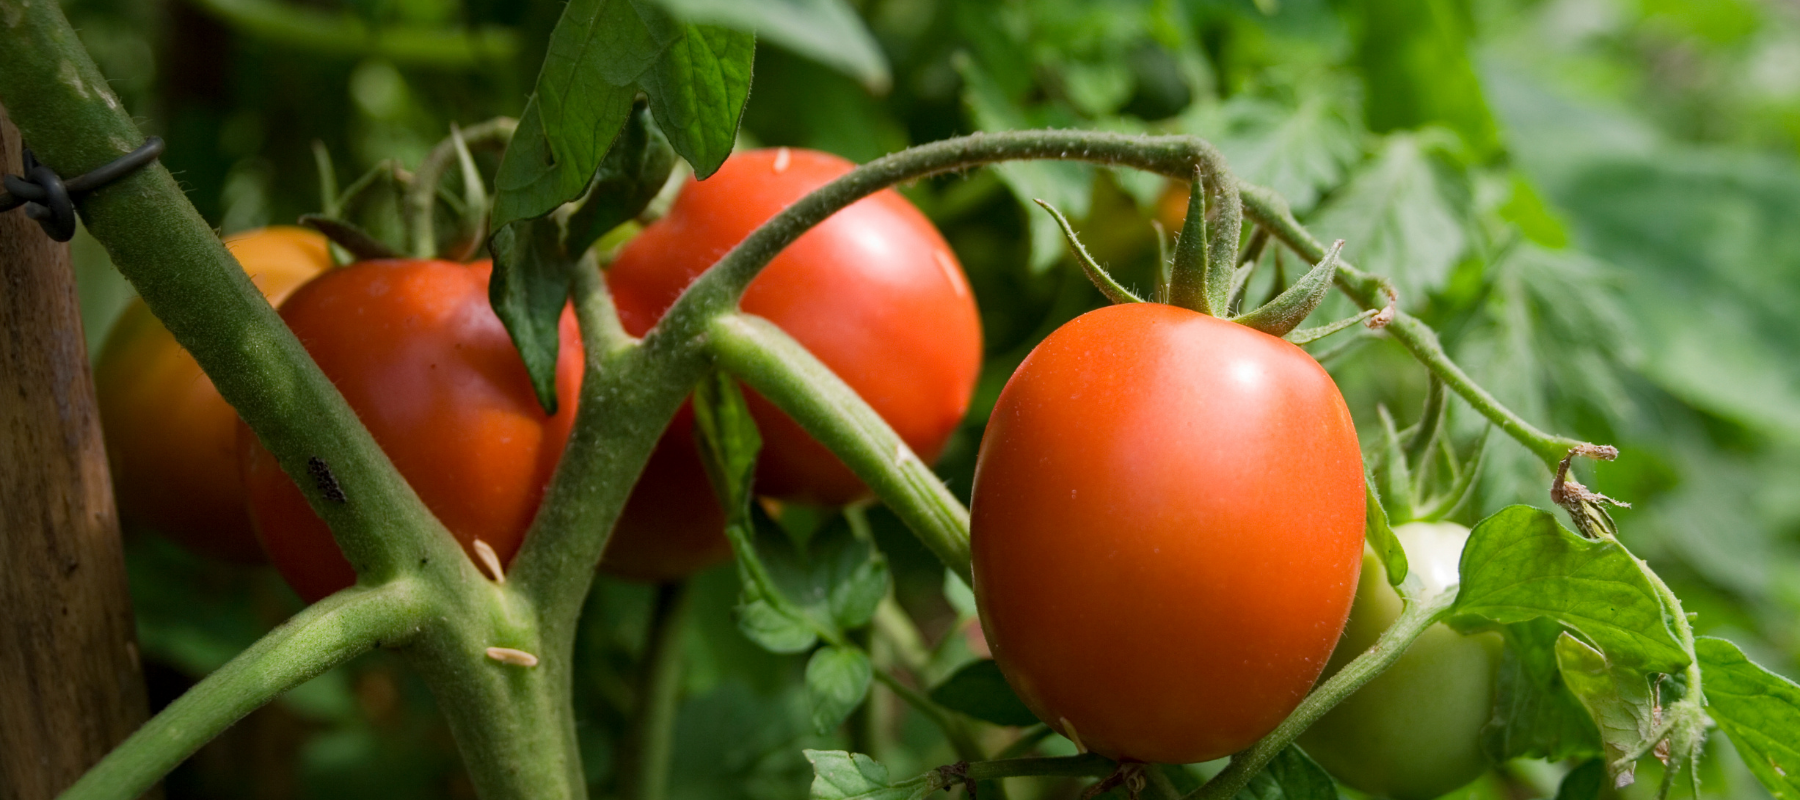 Common tomato growing problems and how to fix them